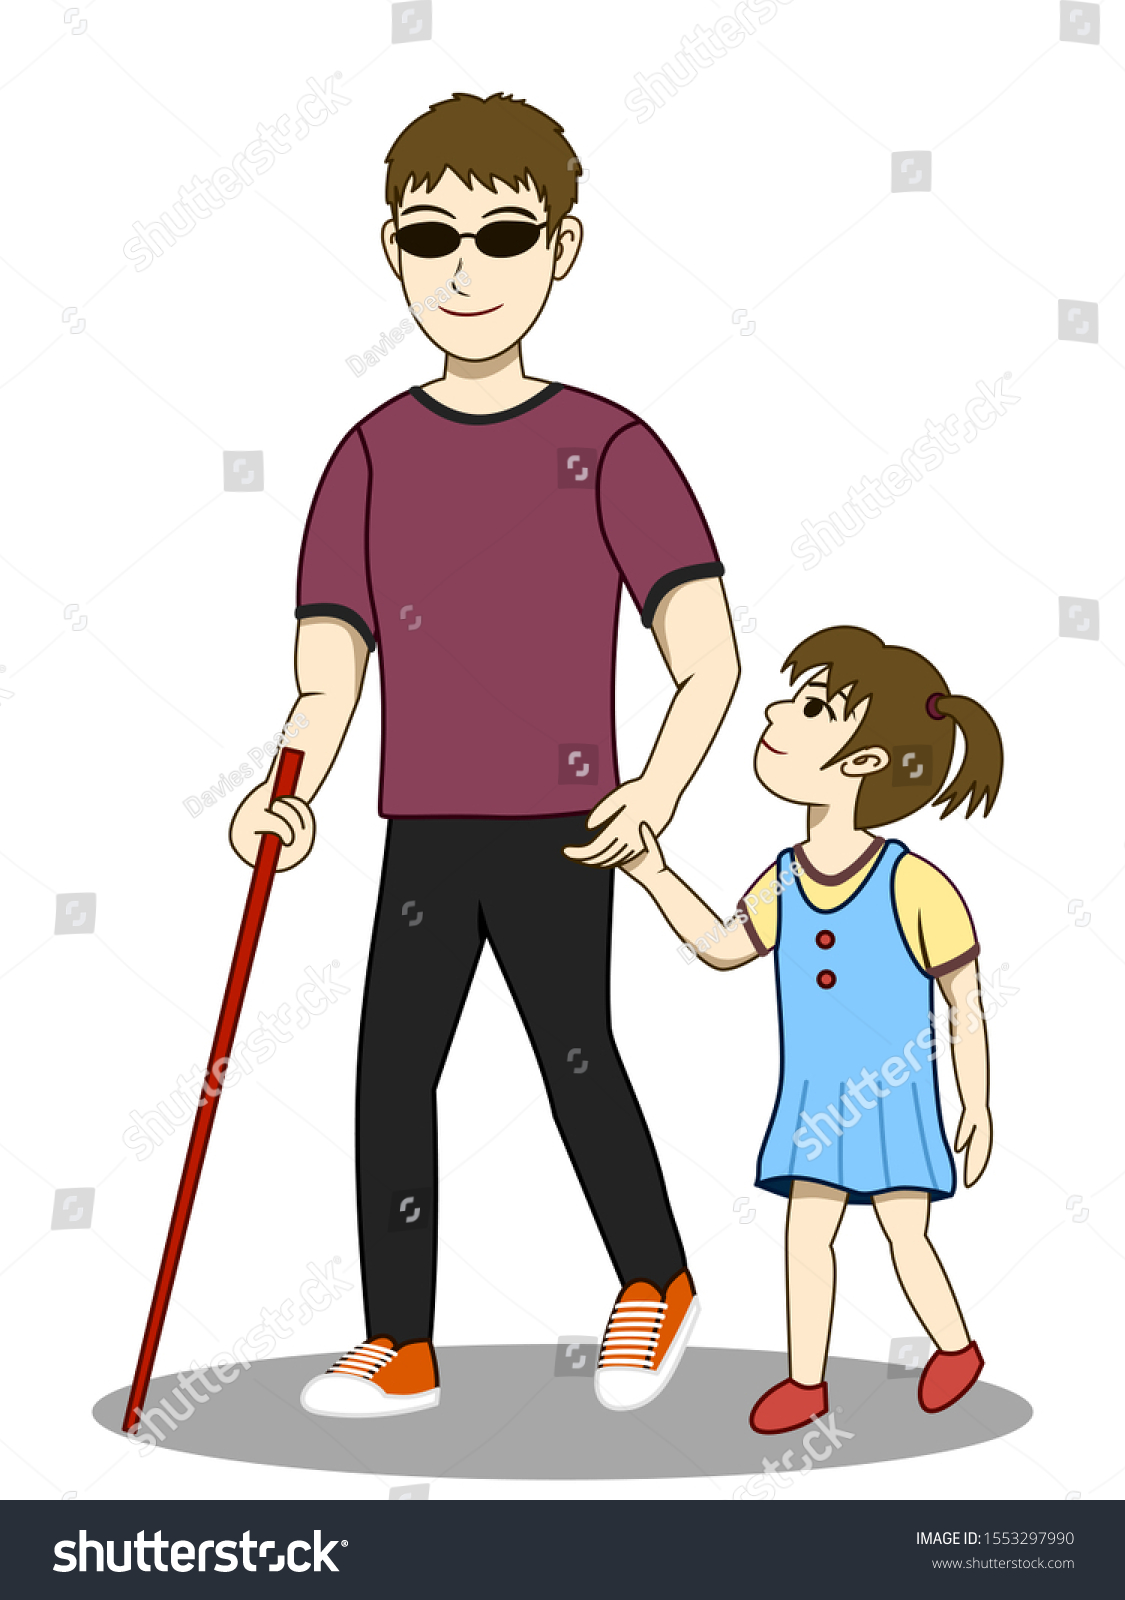 SVG of Vector illustration of Blind man and his daughter are walking together. His daughter take care and guide him. Both look happy. It's a lovely family image. svg